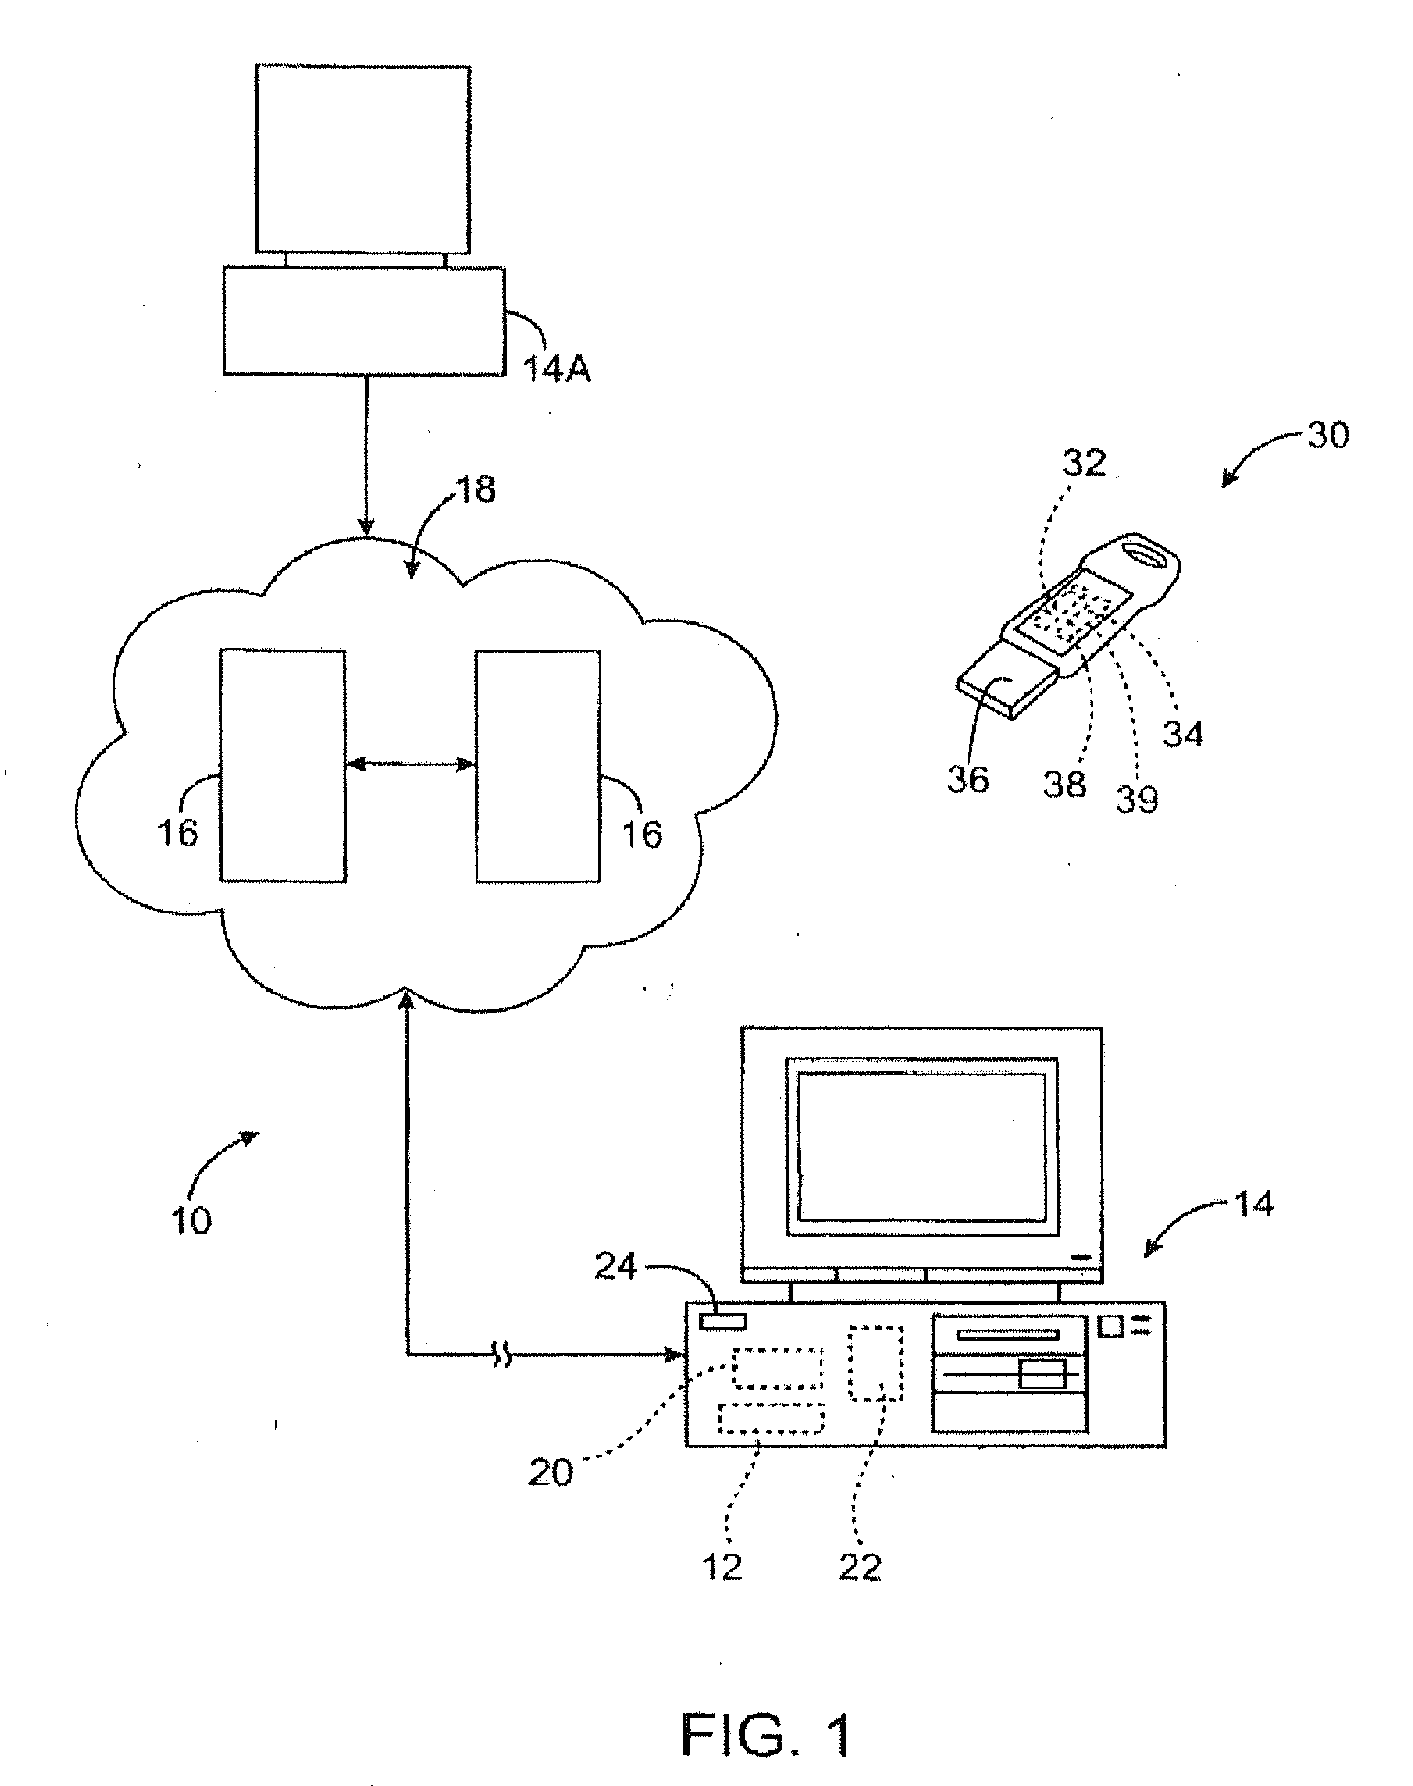 Method and Apparatus for Dynamic Generation of Symmetric Encryption Keys and Exchange of Dynamic Symmetric Key Infrastructure